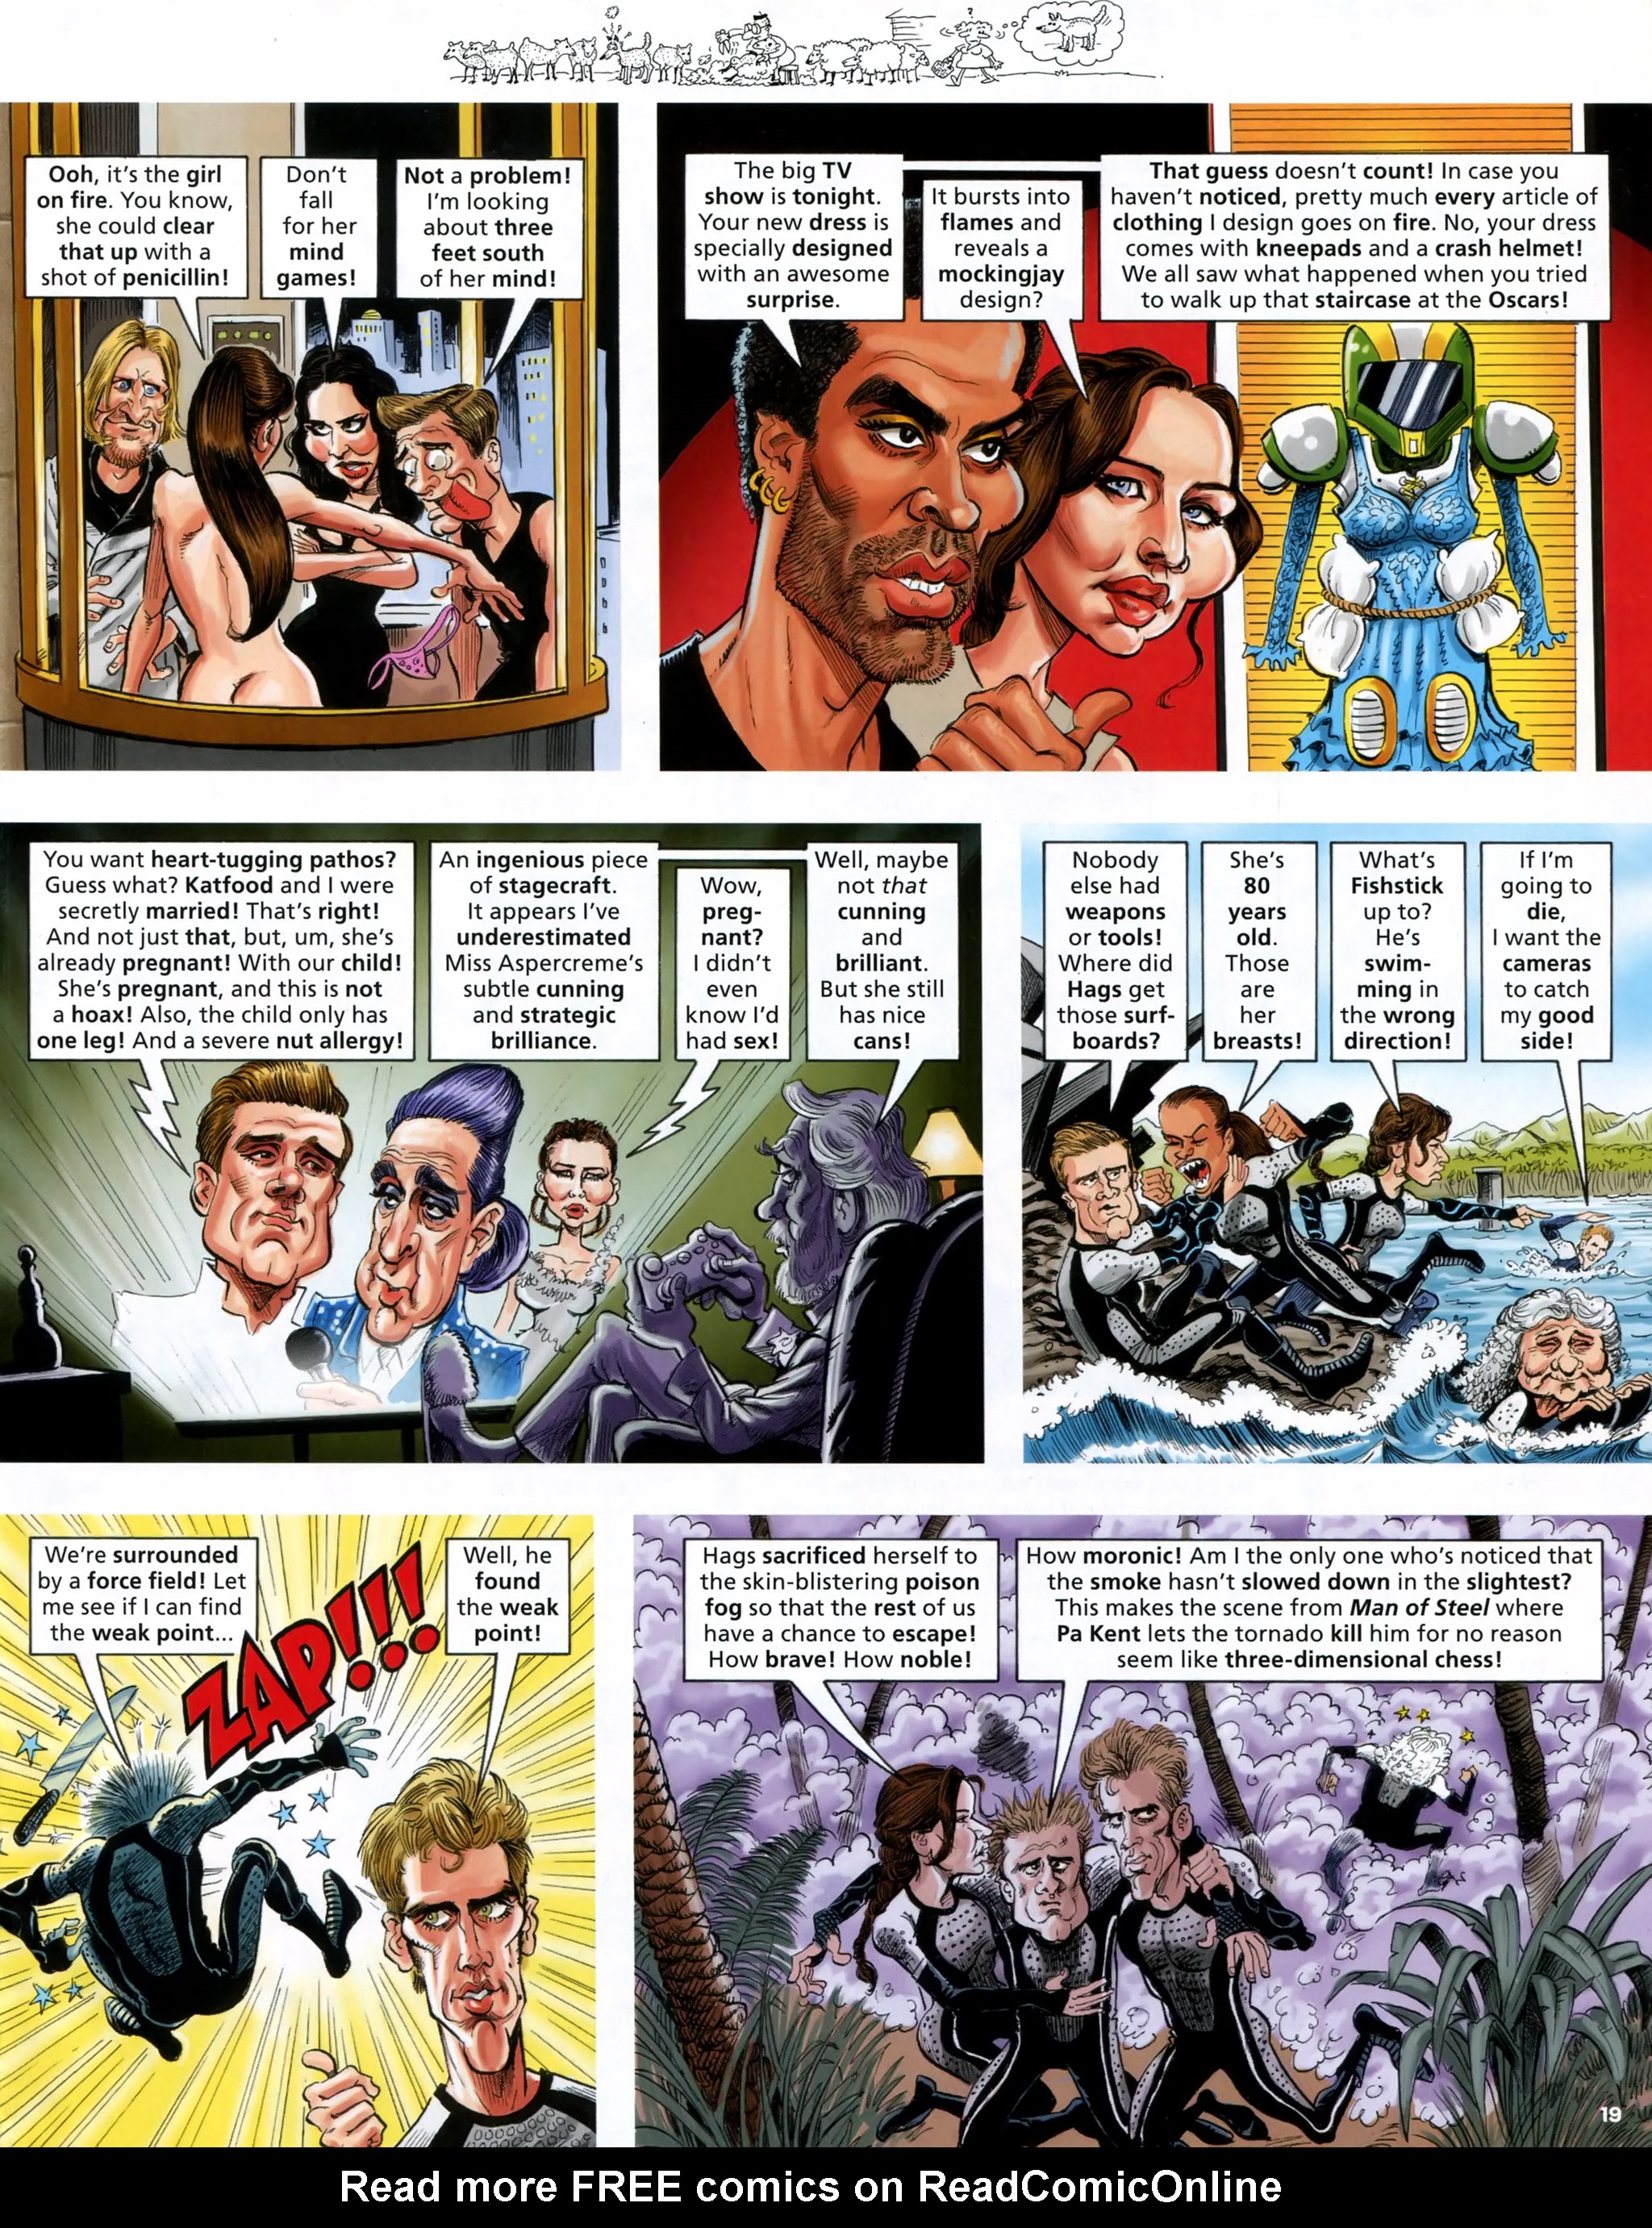 Read online MAD comic -  Issue #526 - 18